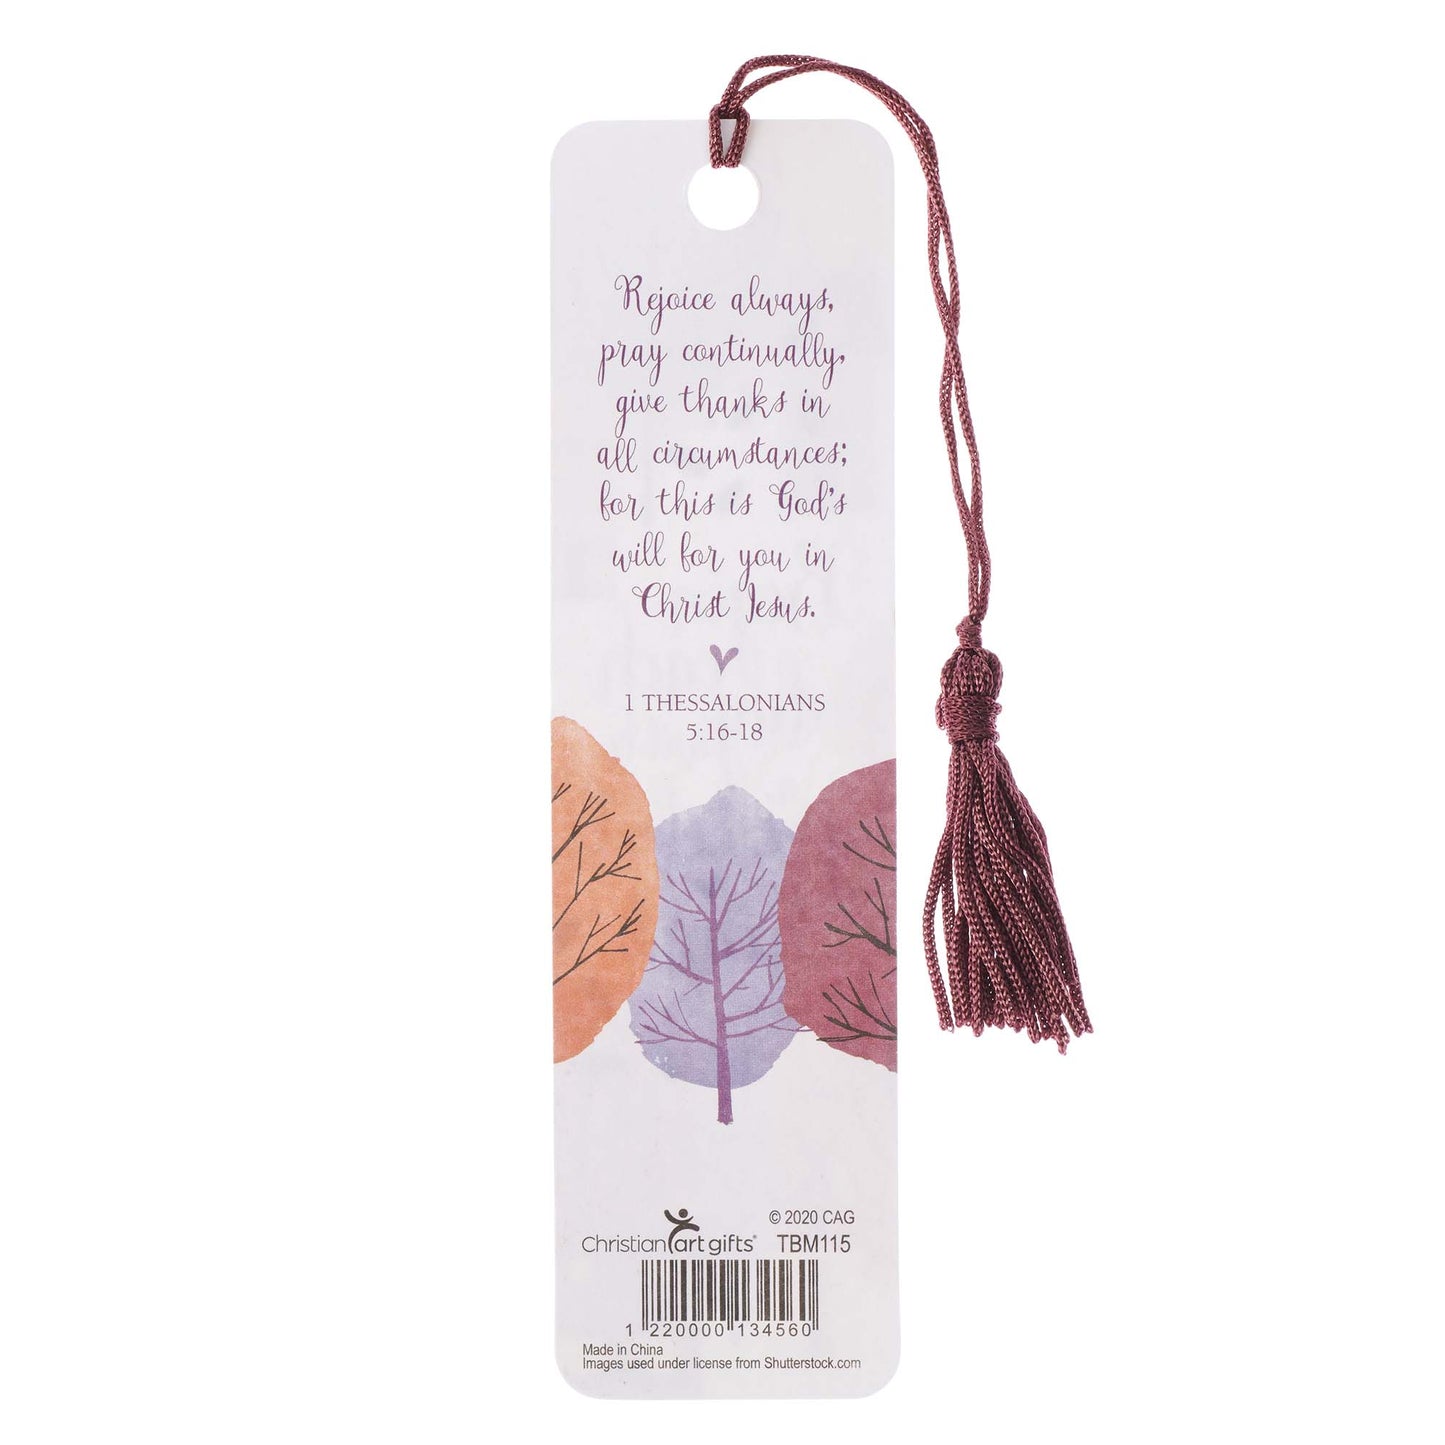 Begin Each Day with a Grateful Heart Bookmark with Tassel - The Christian Gift Company